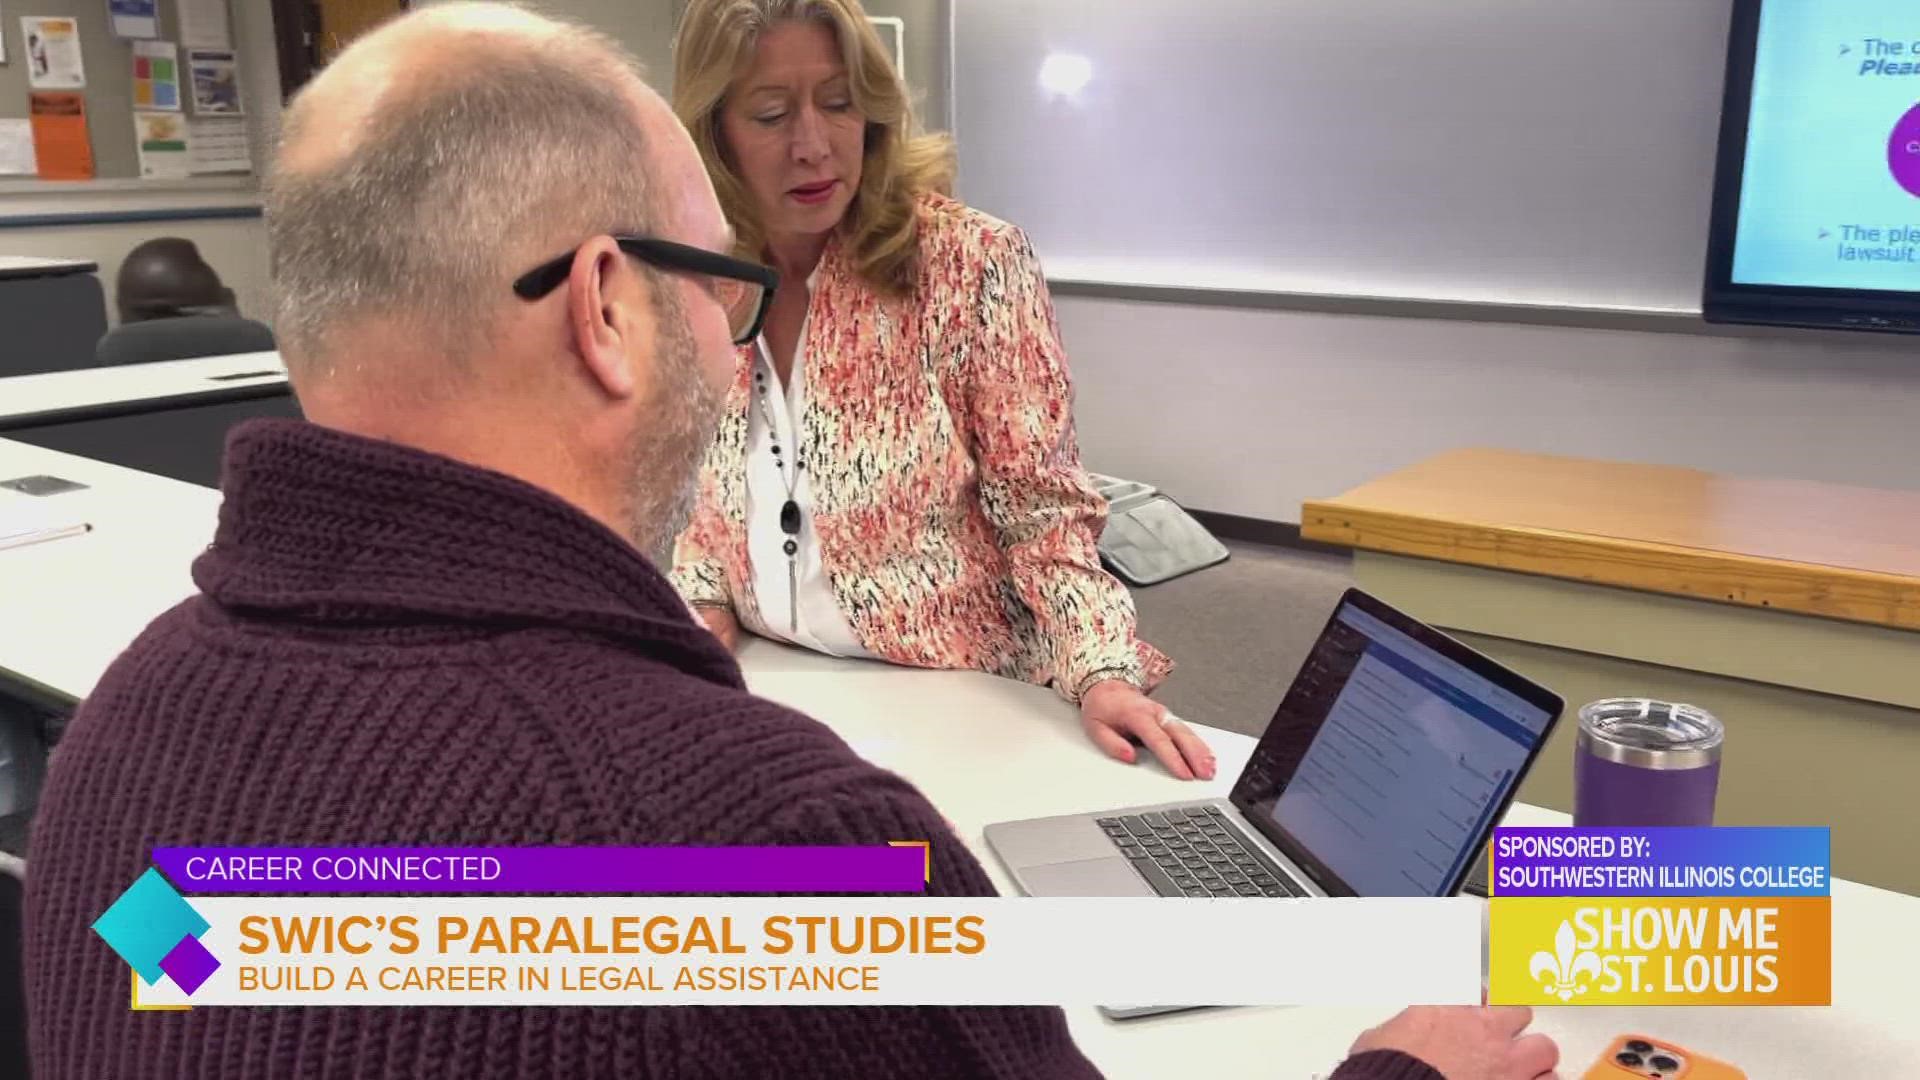 Malik Wilson sat down with SWIC's Paralegal Studies Coordinator and program Alumni to discuss how paralegal studies can open up a new realm of career possibilities.